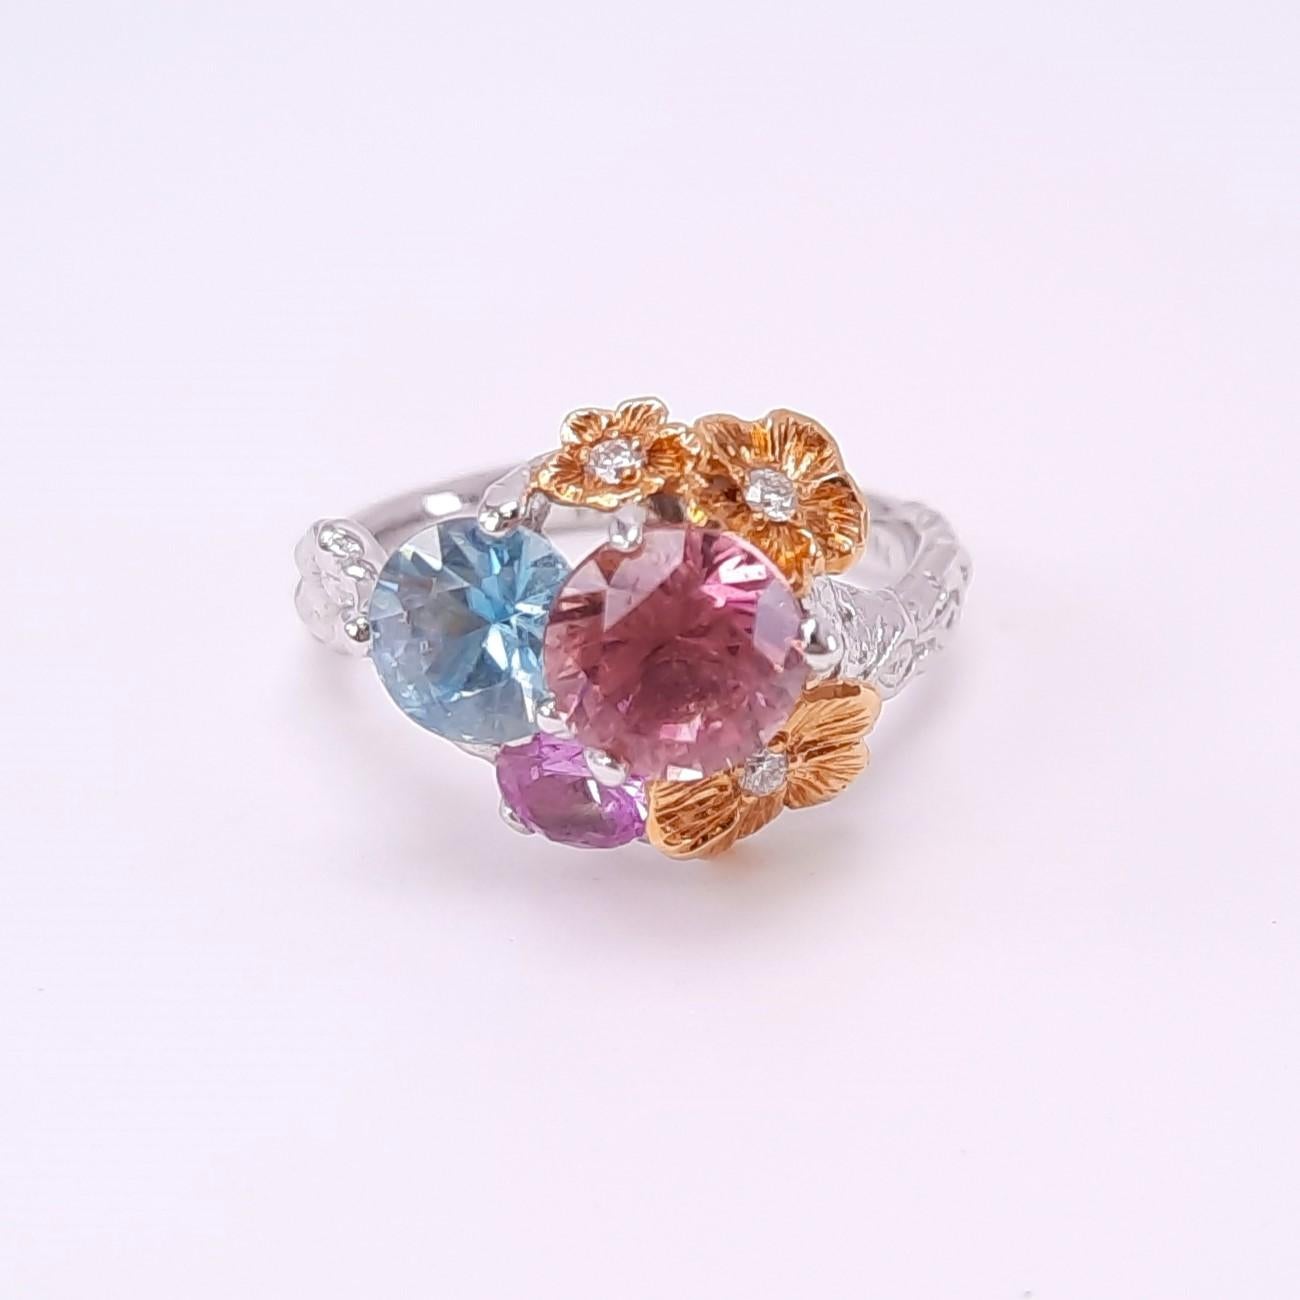 Handmade in 18K gold, Moiseikin's adorable floral ring gives mesmerising combination of pink tourmaline, blue zircon, diamonds, and fancy sapphires. Inspired by the delicate beauty of blooming flowers swaying in a fresh breeze, this ring captures